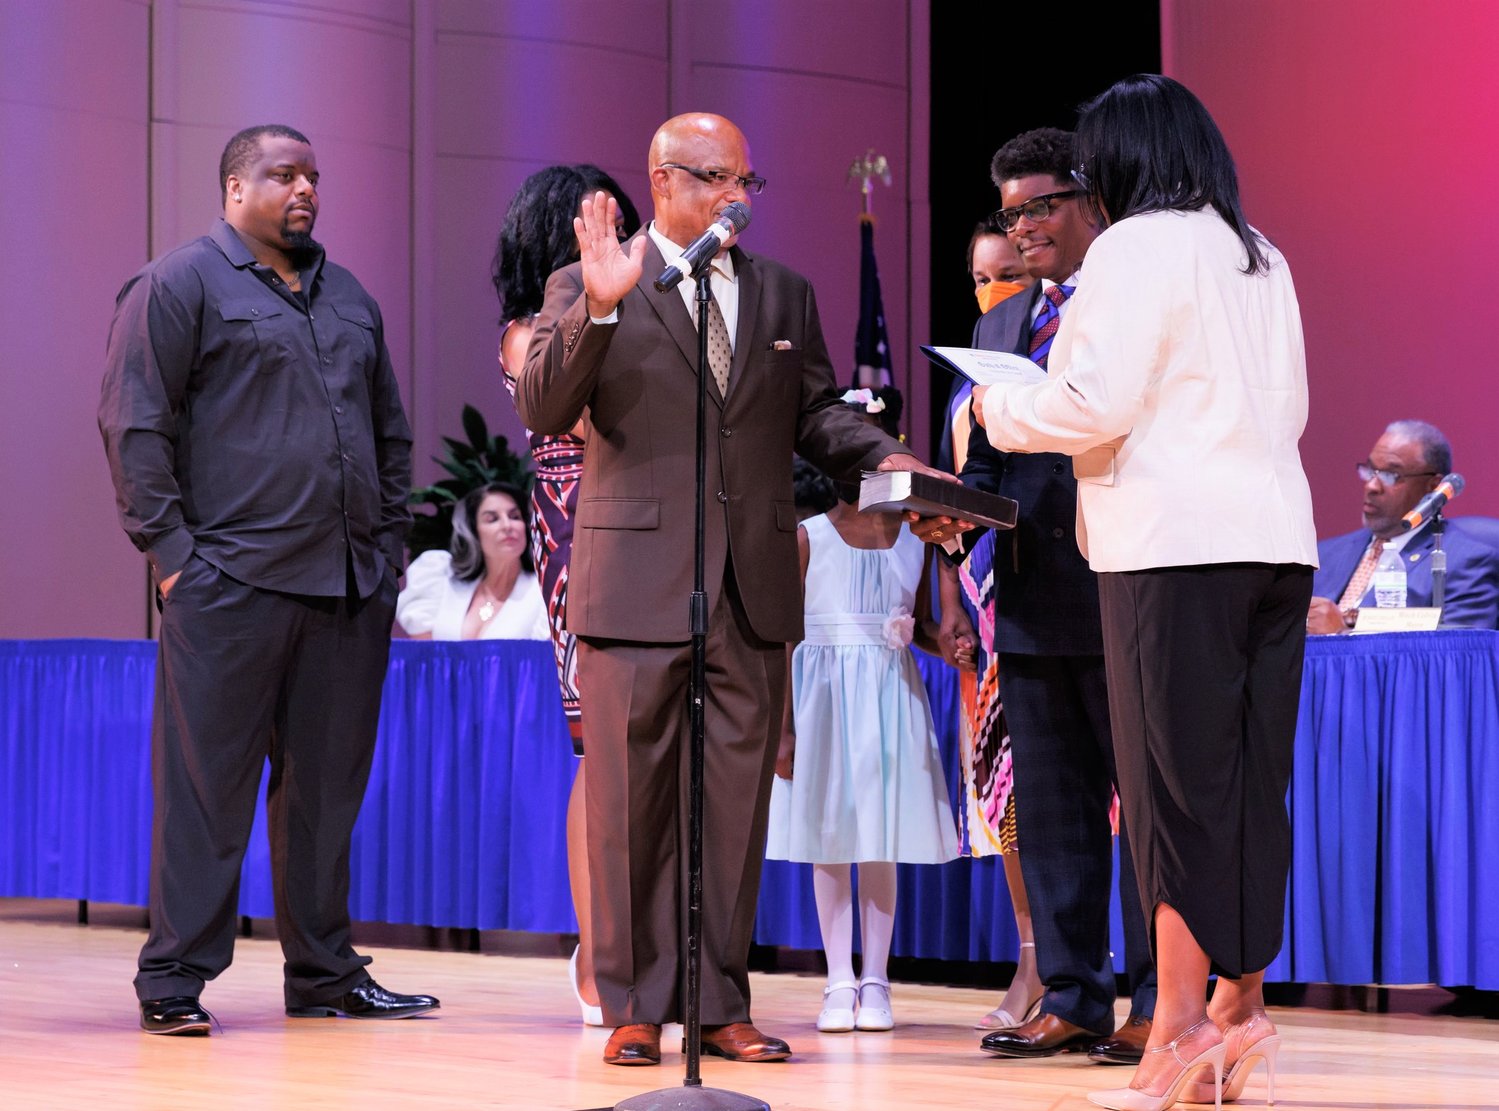 Derrick Thompson takes the oath of office to become a member of the Fayetteville City Council on Thursday night.